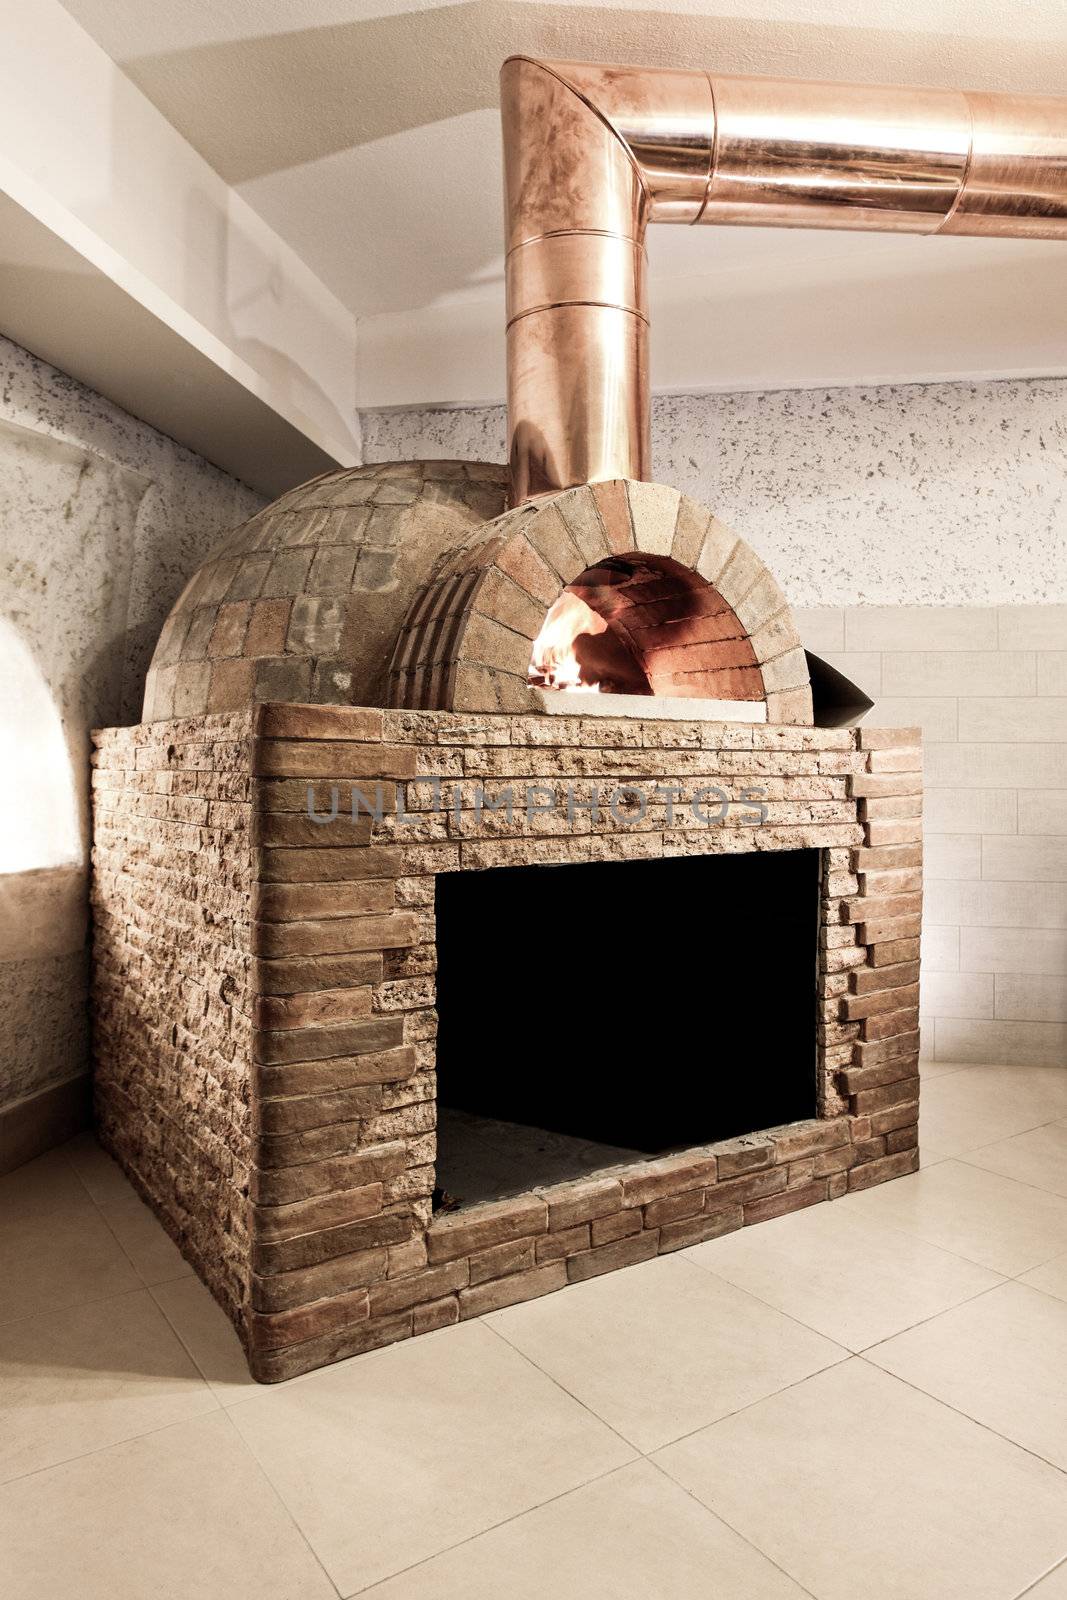 wood fired oven in a reataurant interior